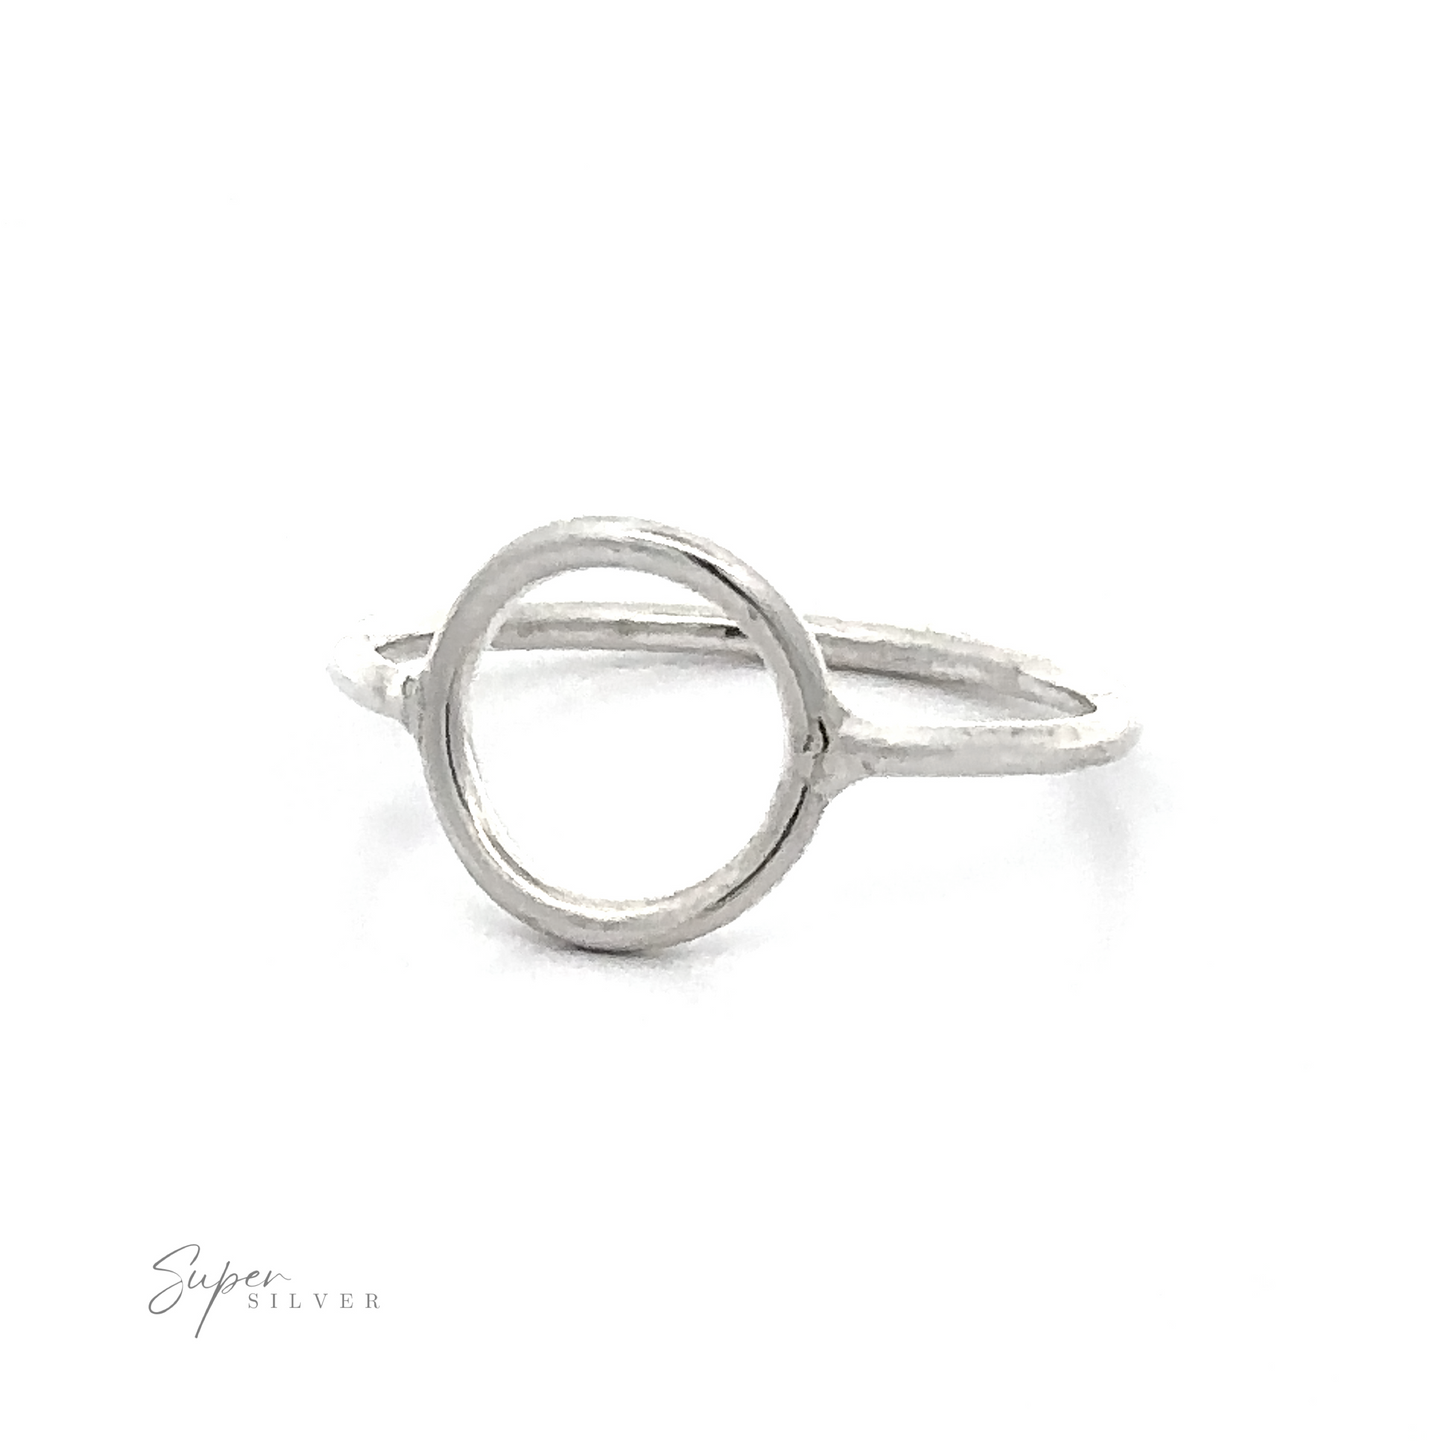 A round Plain Silver Ring With A Circle Design with a band.